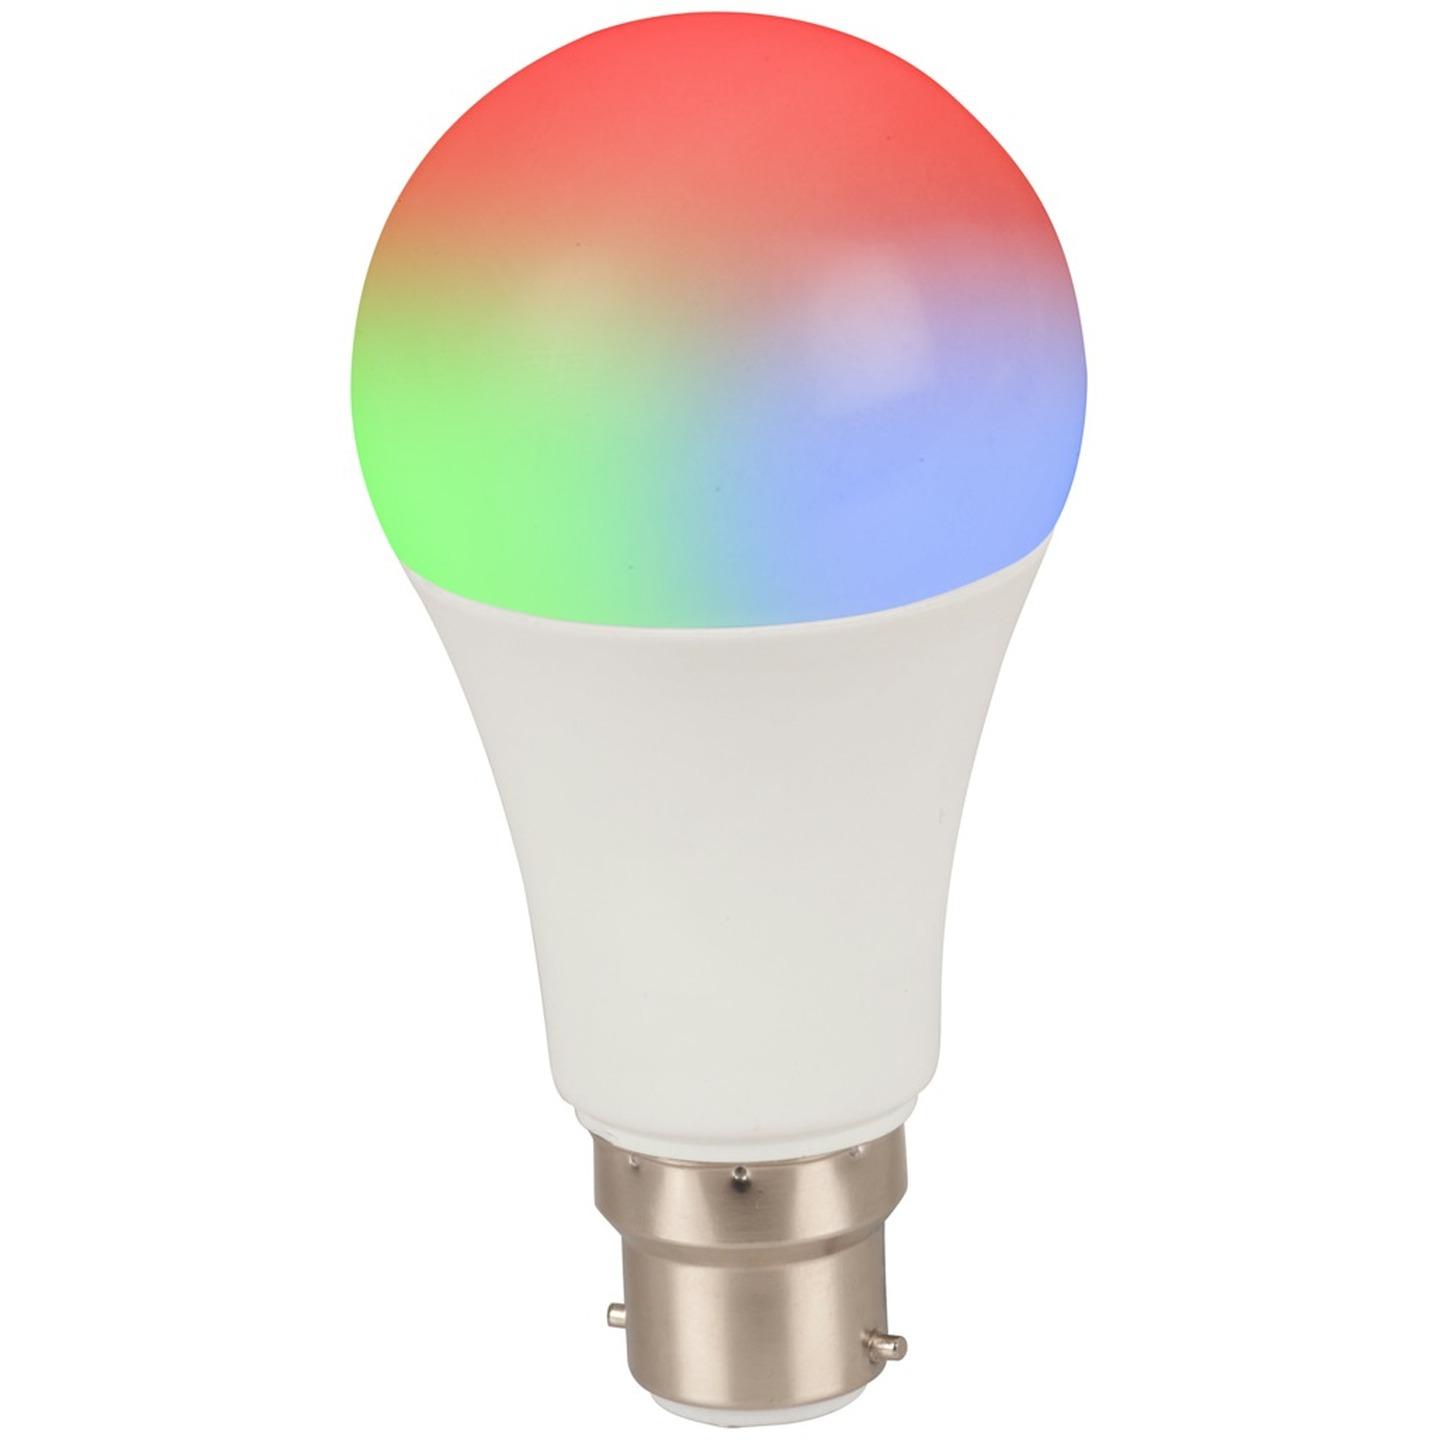 Smart Wi-Fi LED Bulb with Colour Change with Bayonet Light Fitting